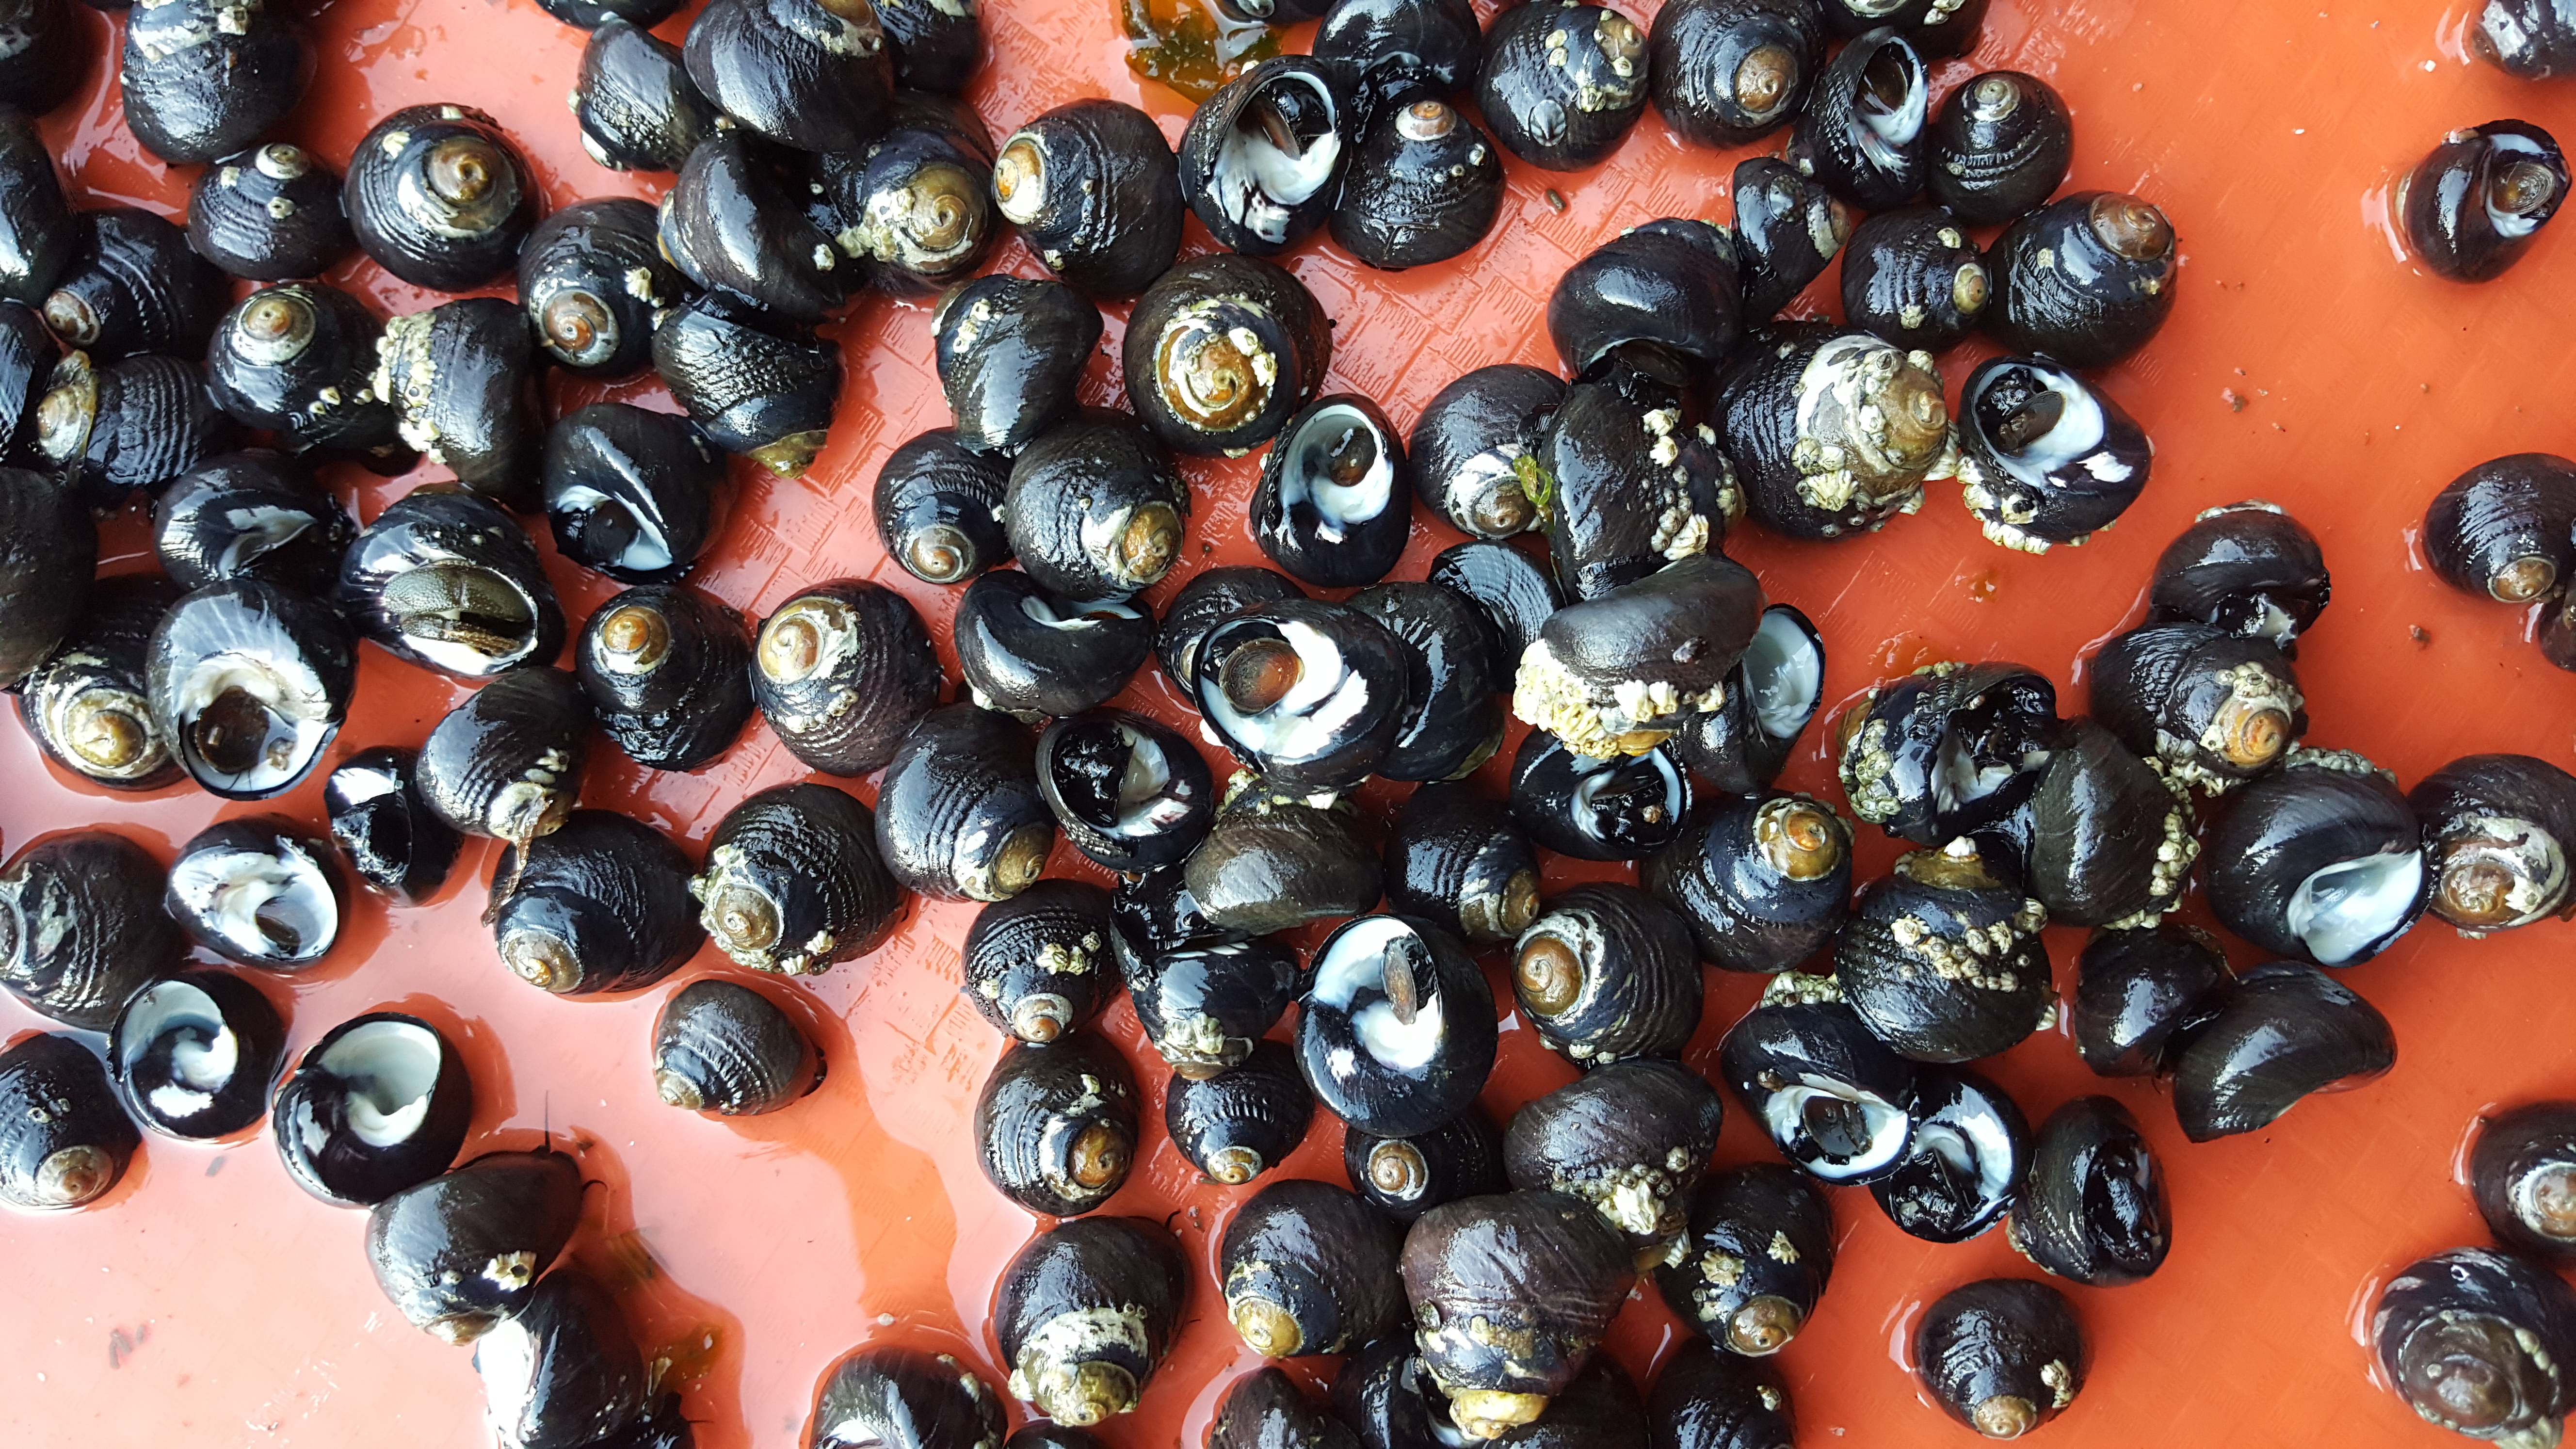 many black turban snails on a red tray ready to be measured.